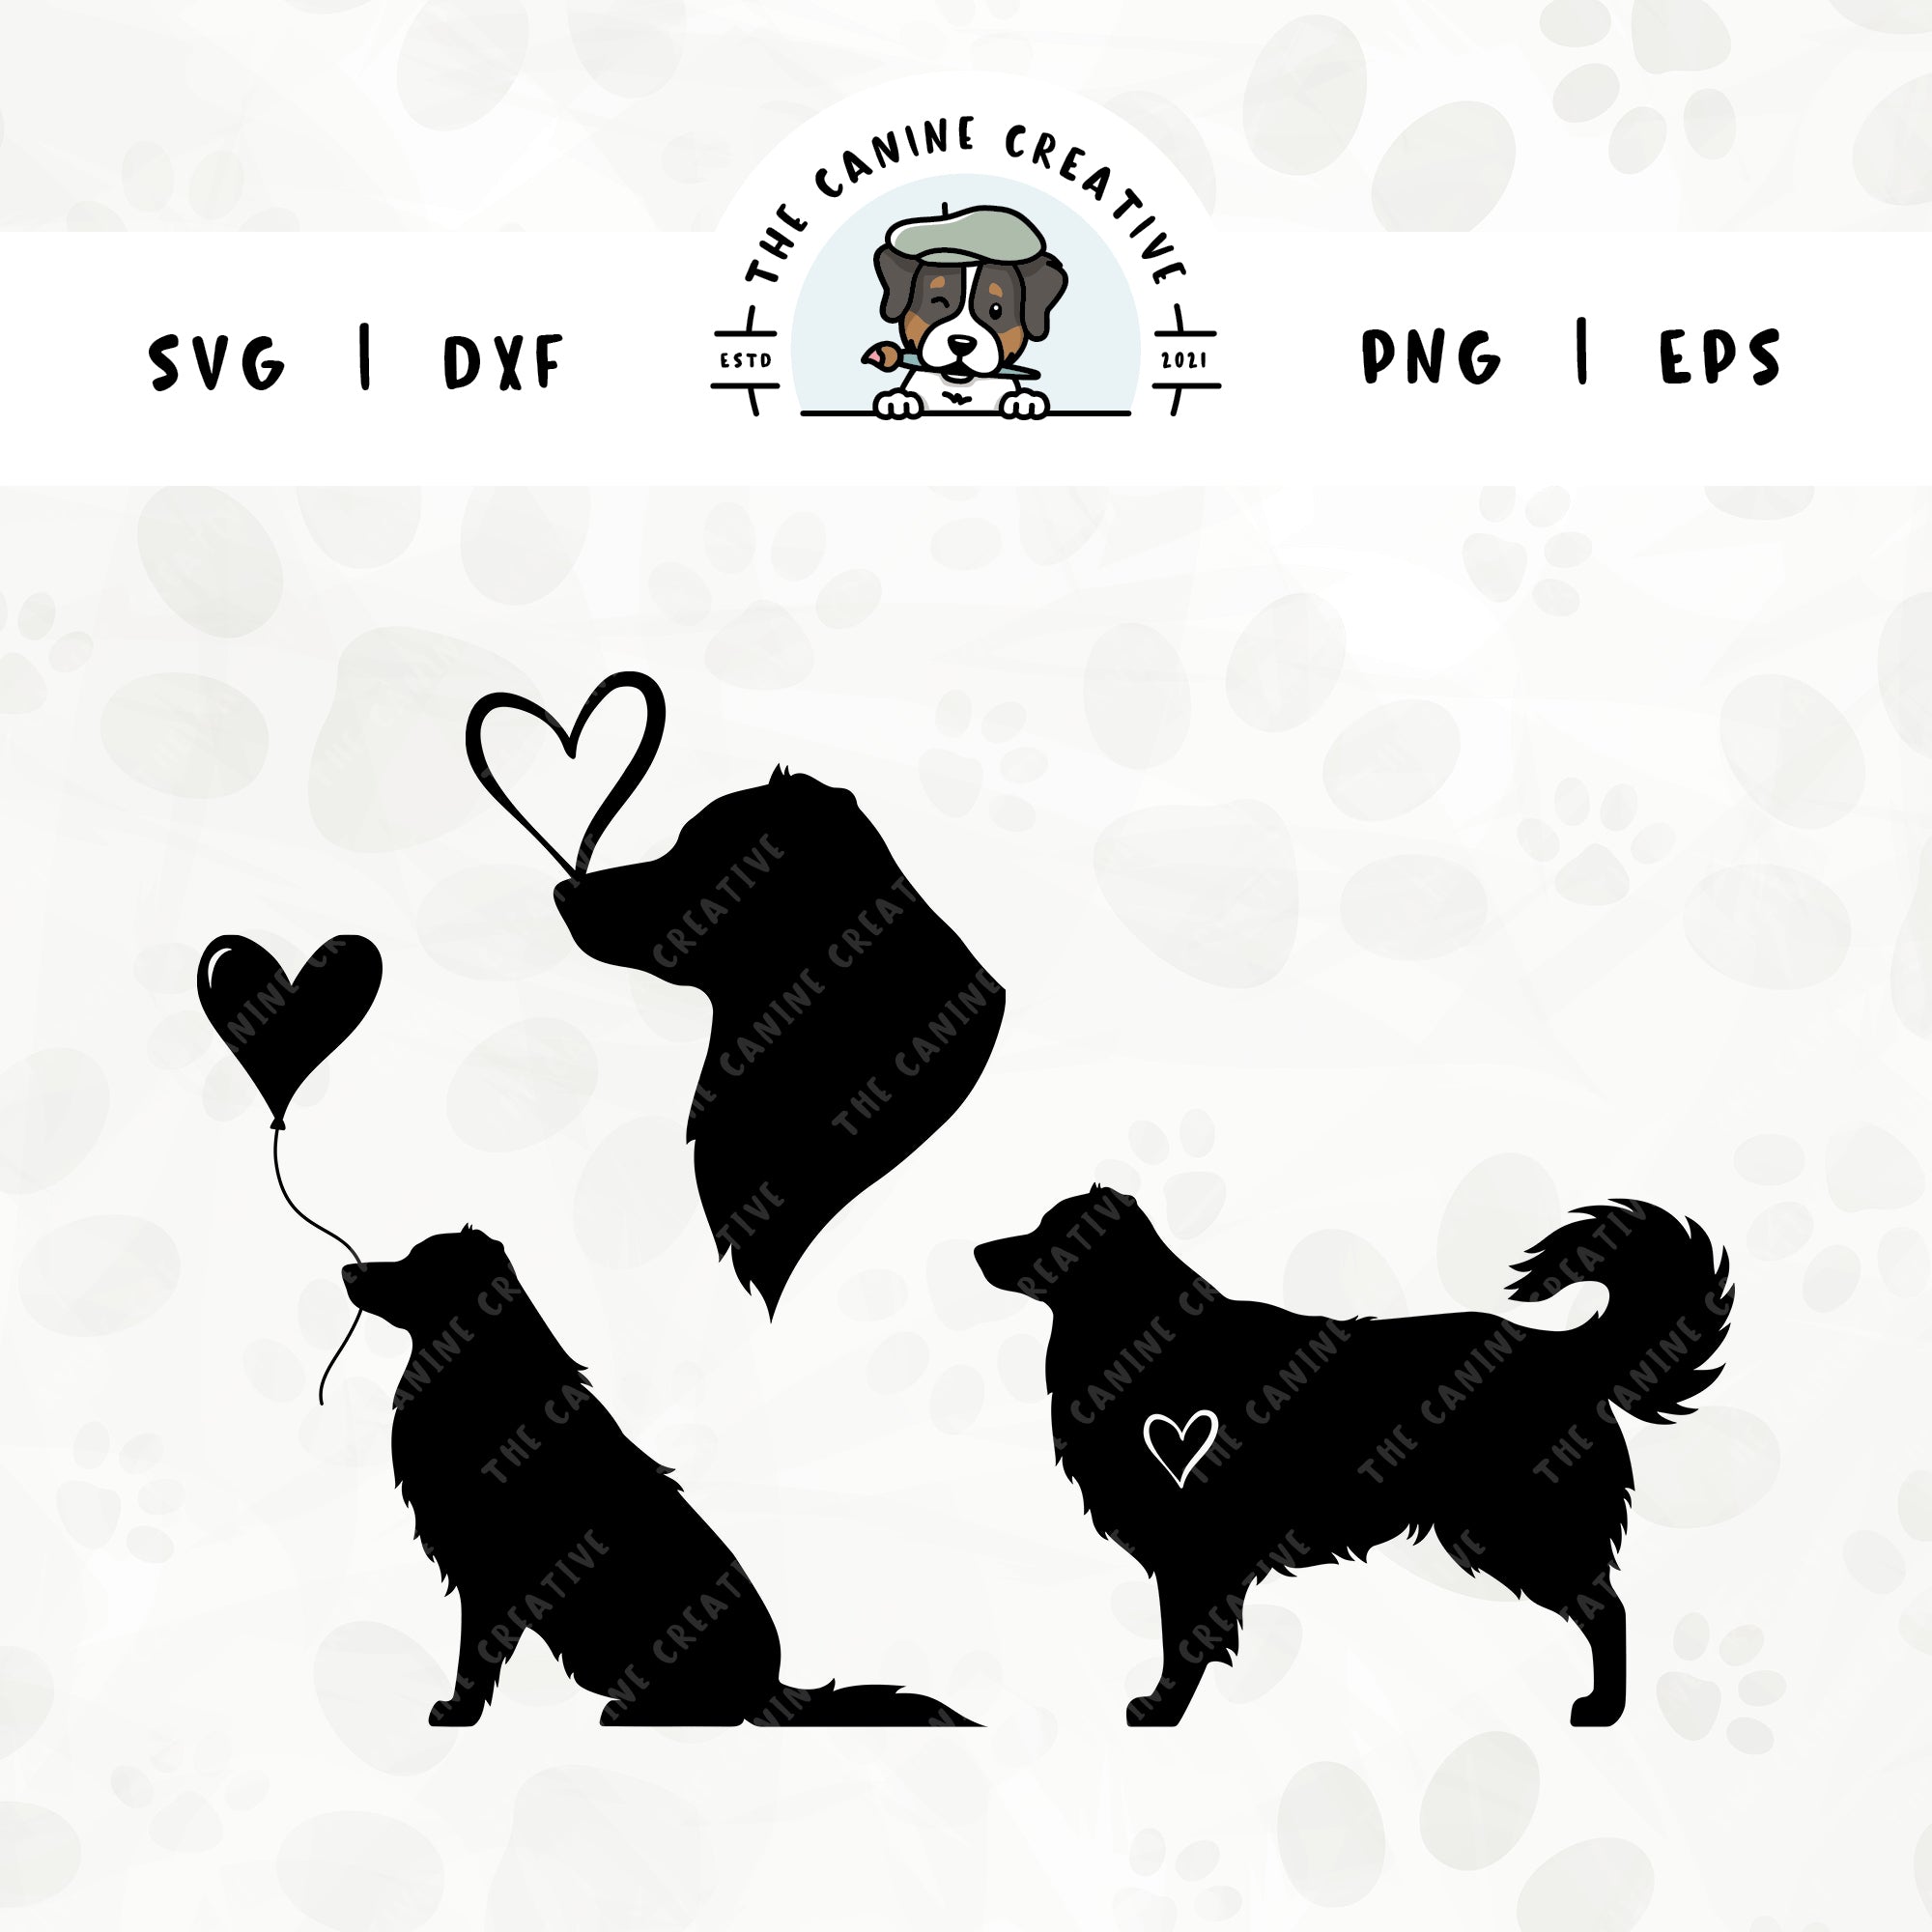 This 3-pack, long tail Australian Shepherd silhouette bundle features a head portrait of a dog with a heart perched atop it’s nose, a sitting dog holding a heart balloon, and a standing profile of a dog with a heart inset. File formats include: SVG, DXF, PNG, and EPS.